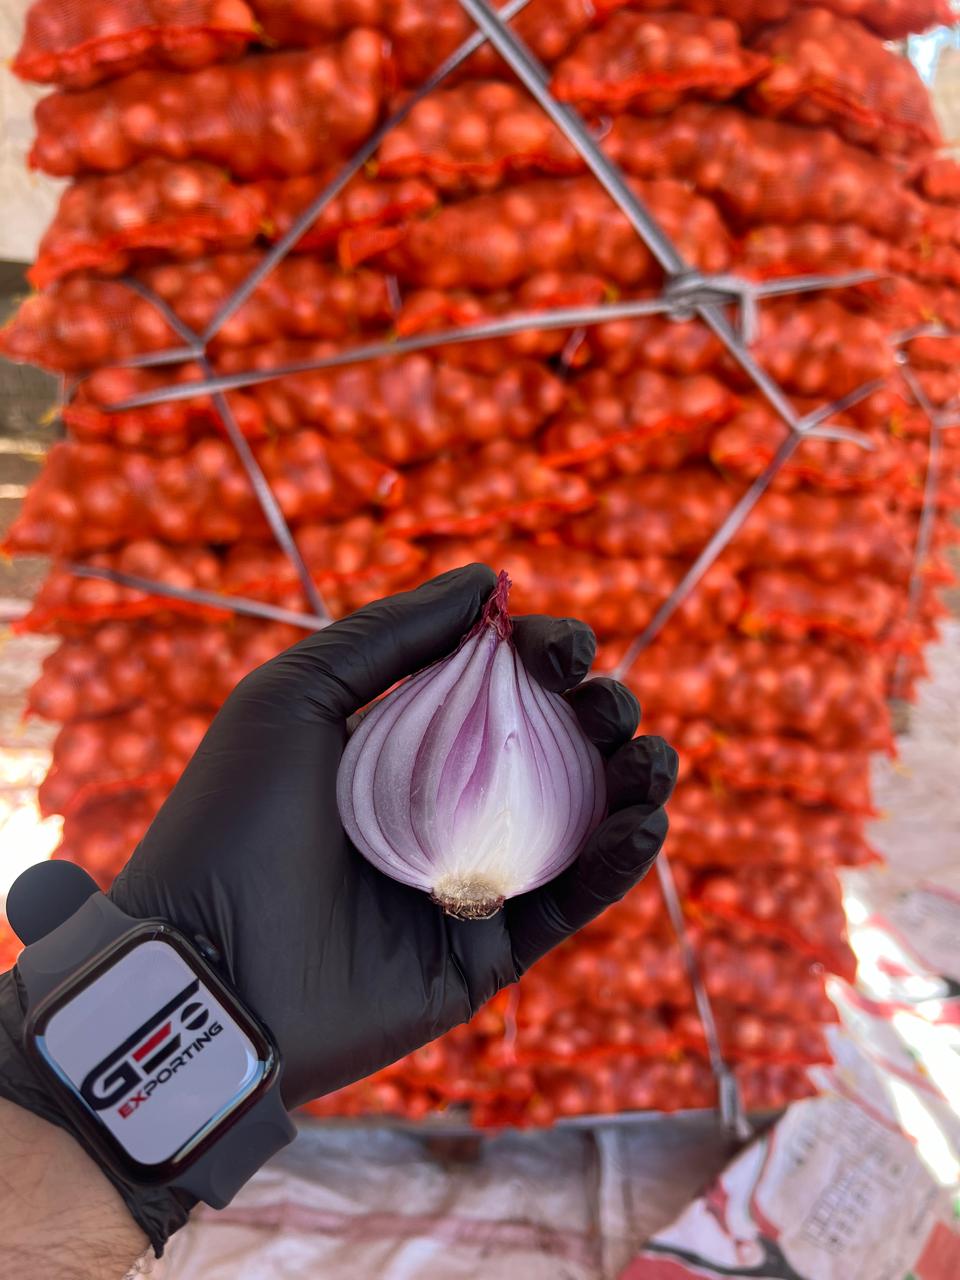 Egyptian Red Onions Quality